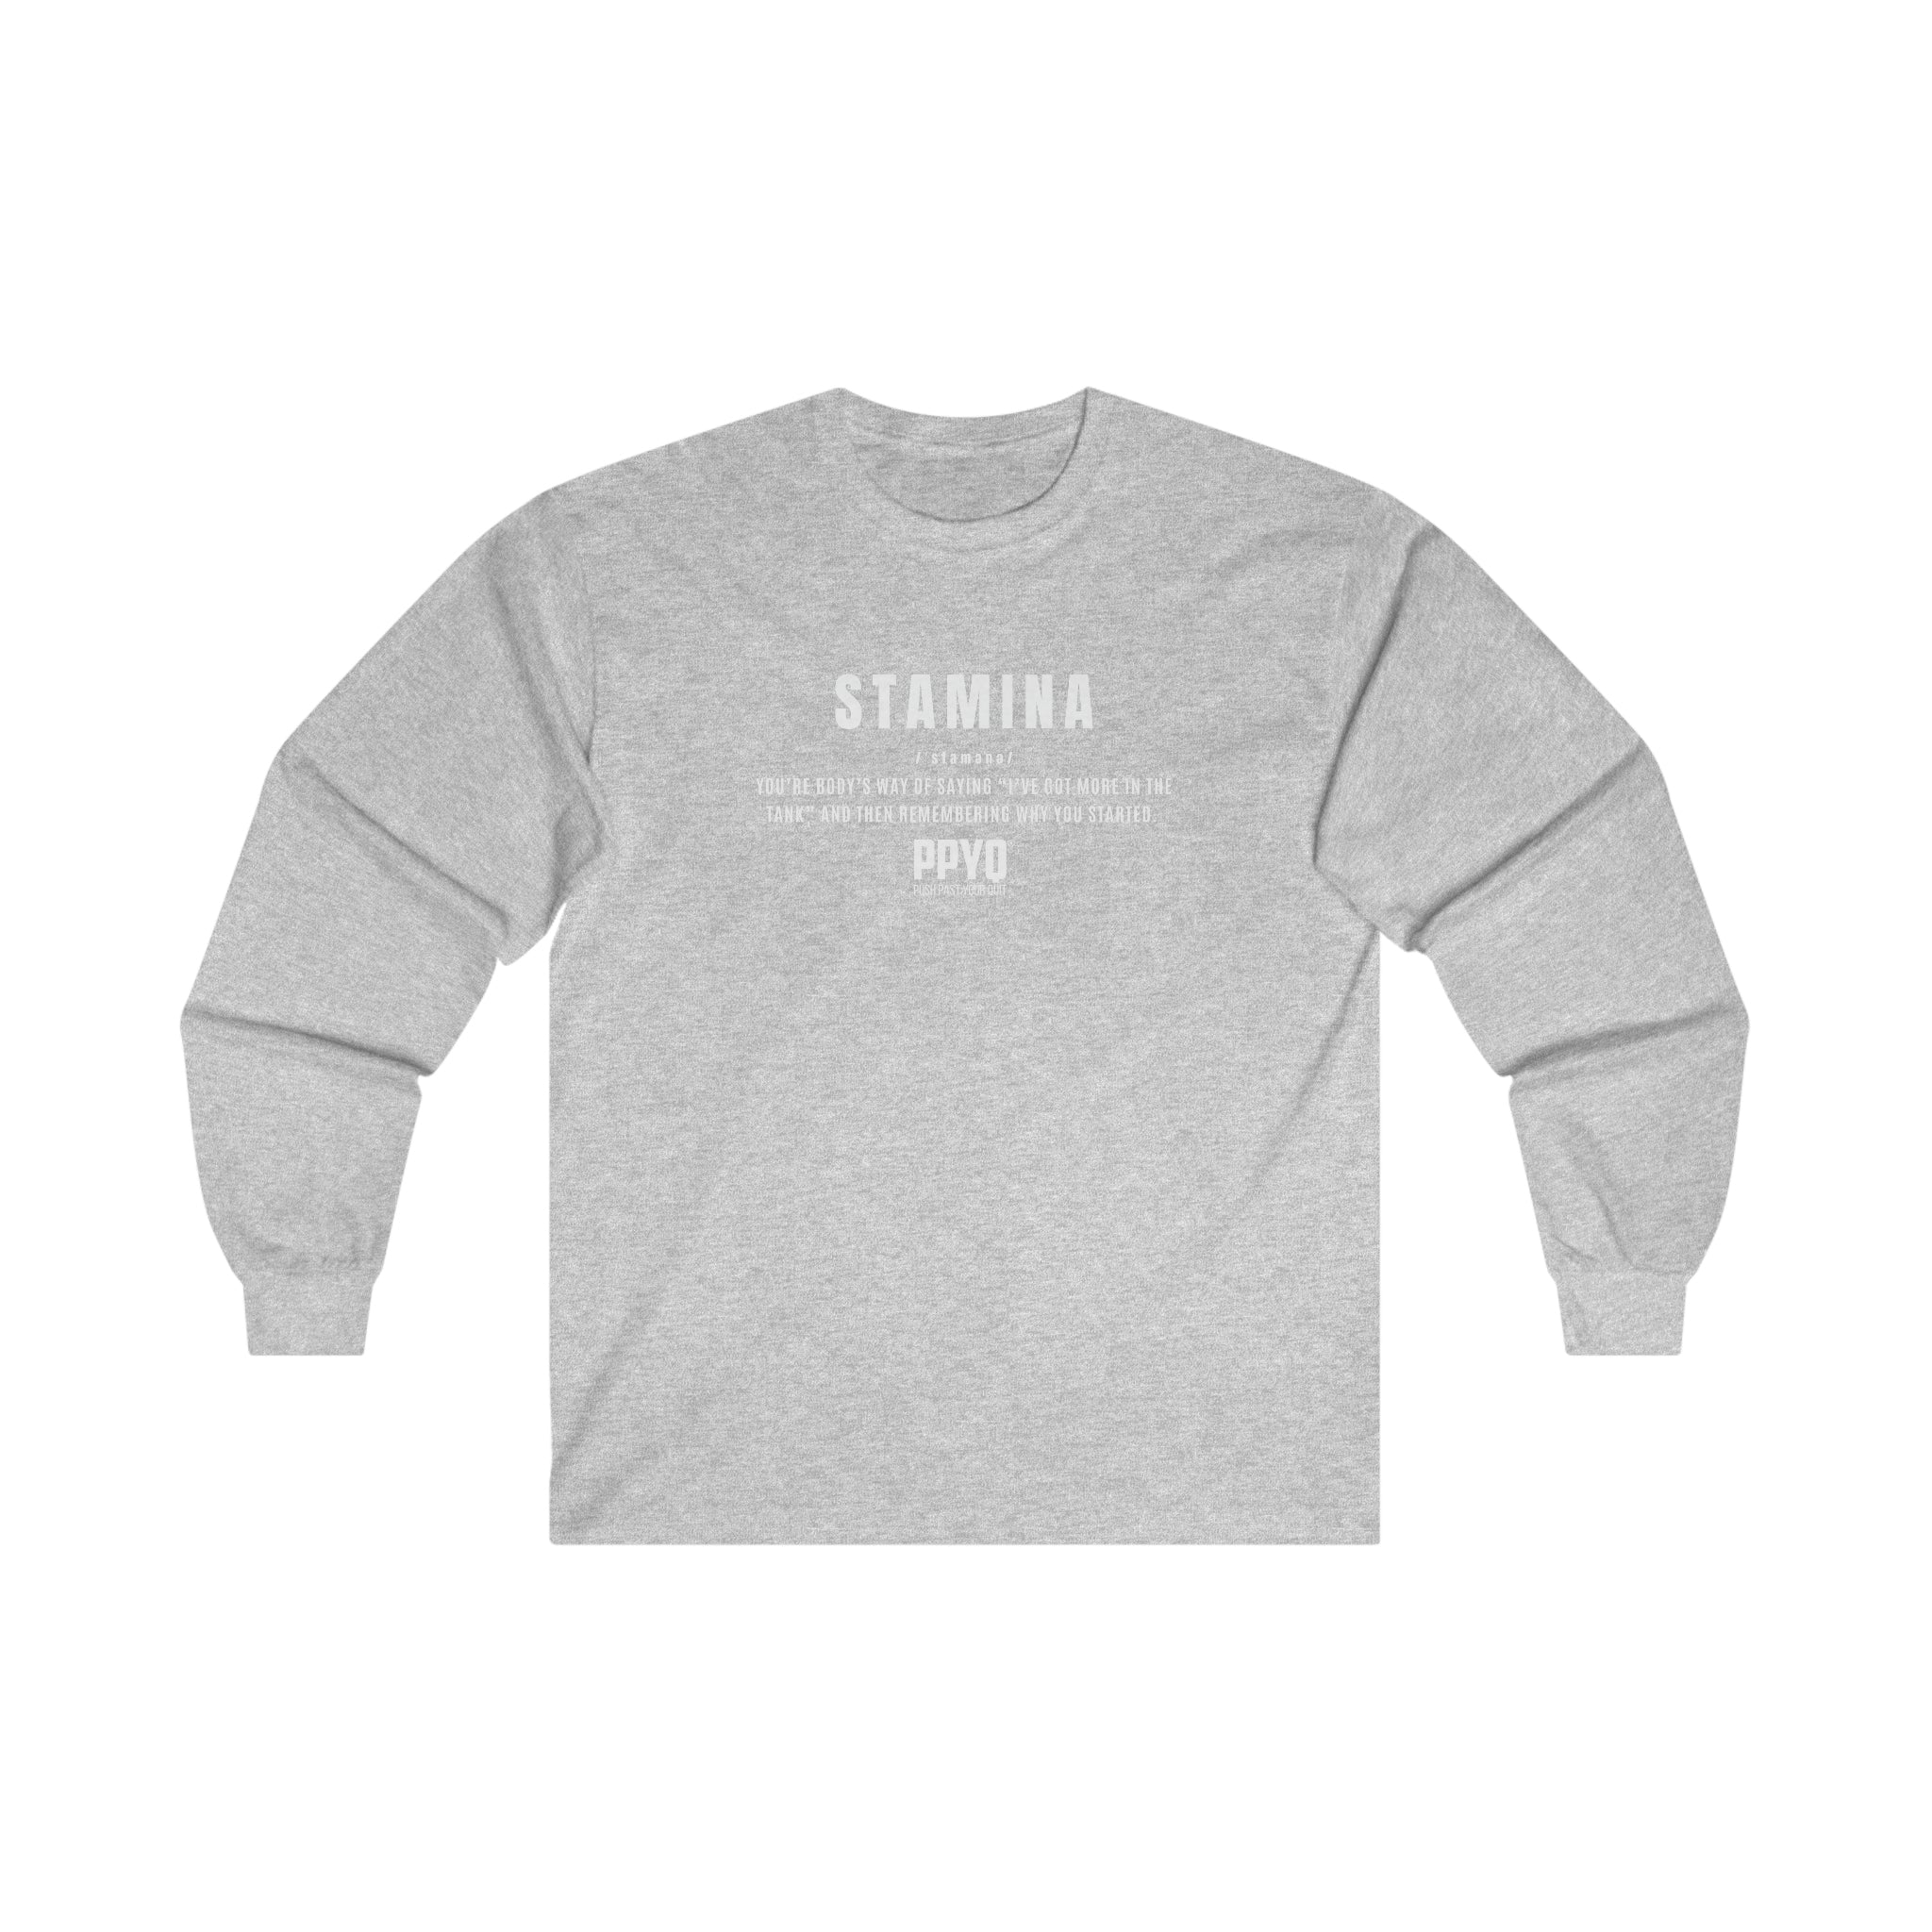 Stamina PPYQ® Defined Long Sleeve Tee